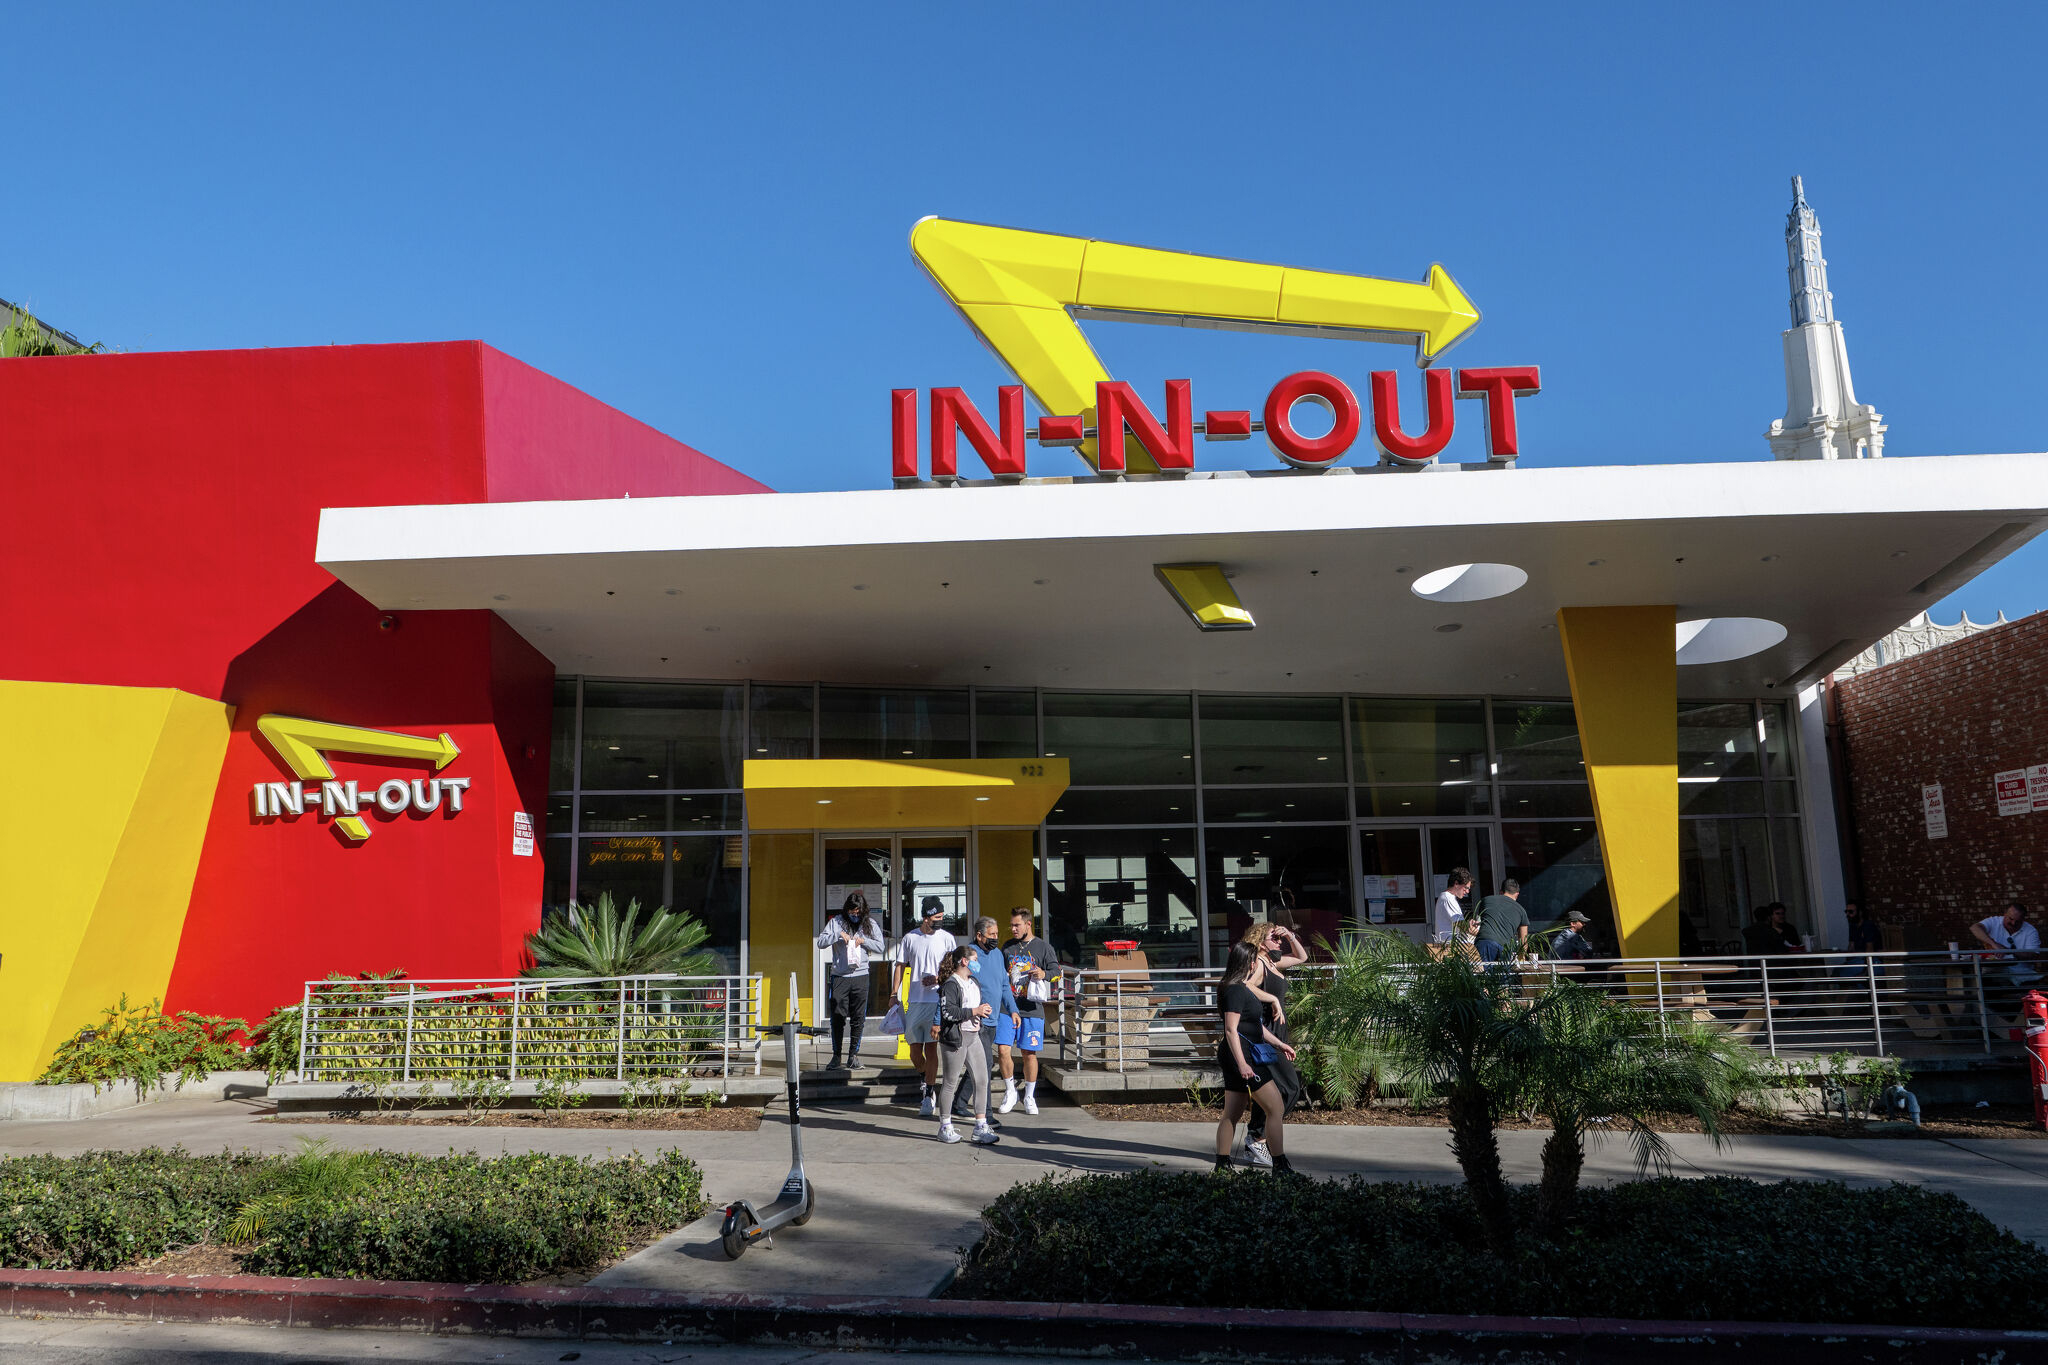 RED TRAY – In-N-Out Burger Company Store